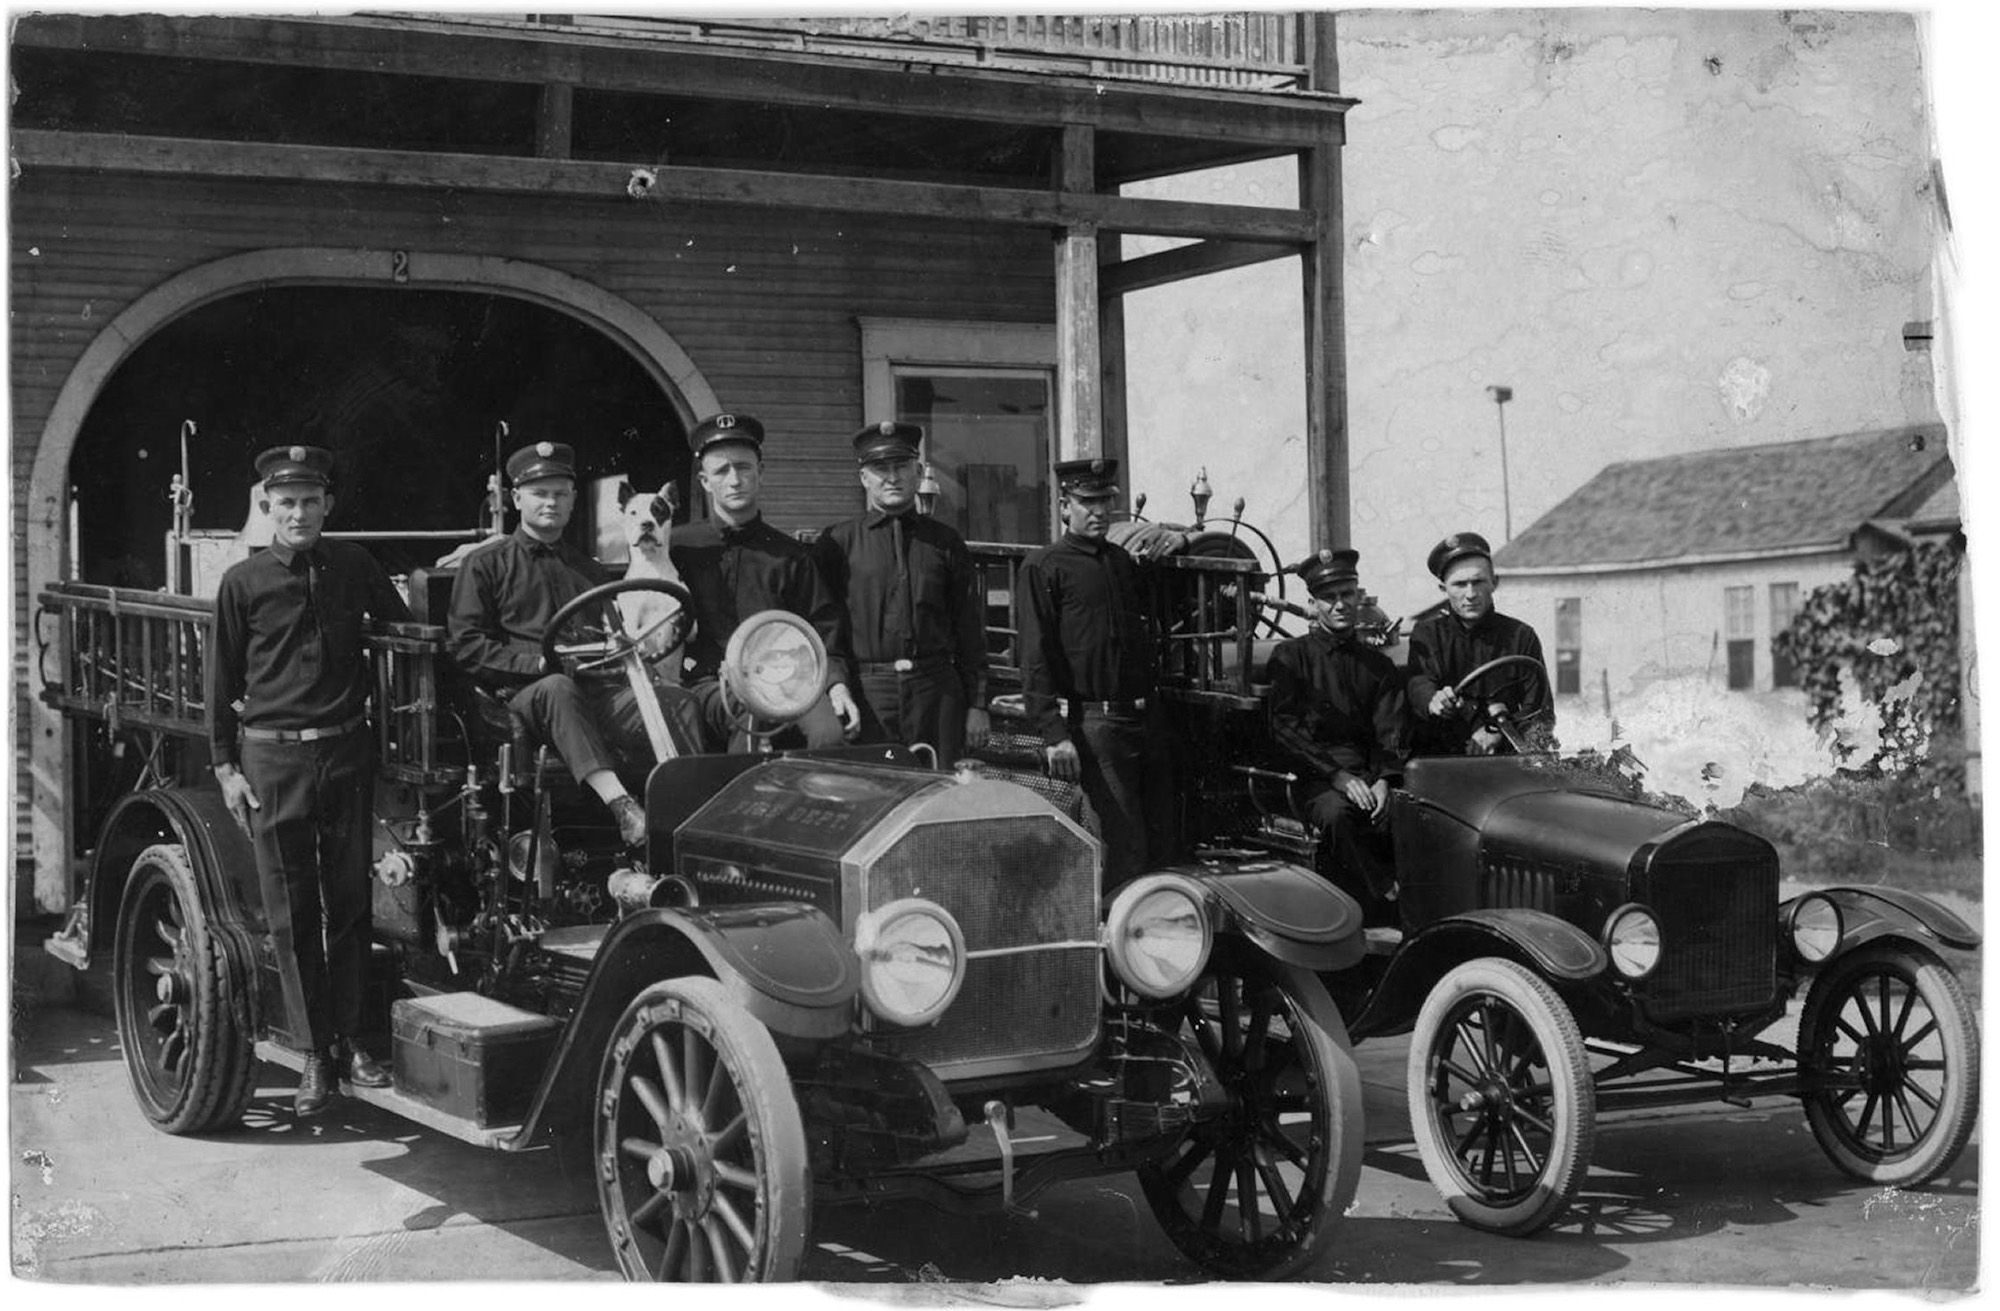 Photograph of seven men and one dog posing on fire trucks outside of the Number Two Fire Station on the corner of Thomas Boulevard and Houston Avenue in Port Arthur Texas. The trucks are a 1923 American LaFrance Pumper and a 1923 Model T Ford. The men are identified as Bill Woods, Ed Sykora, Eugene Ray, Shorty Robins, Jim Salyer, O'Neil Borel, and Pat Etheridge. View full size.